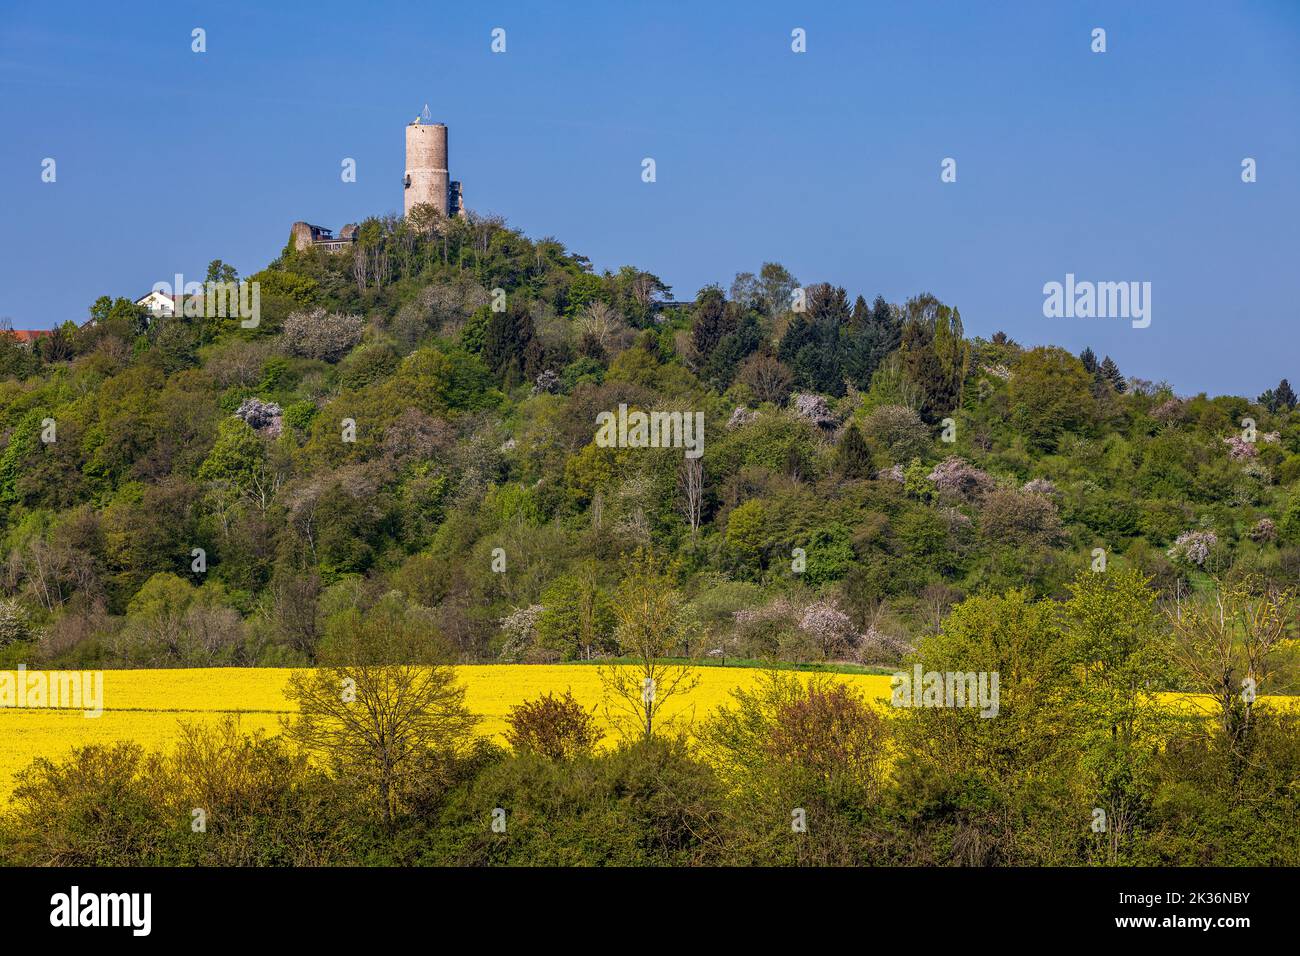 remains of Vetzberg castle on top of Vetzberg hill, an extinct volcano, surrounded by spring landscape and rape fields in Biebertal, Hesse, Germany Stock Photo